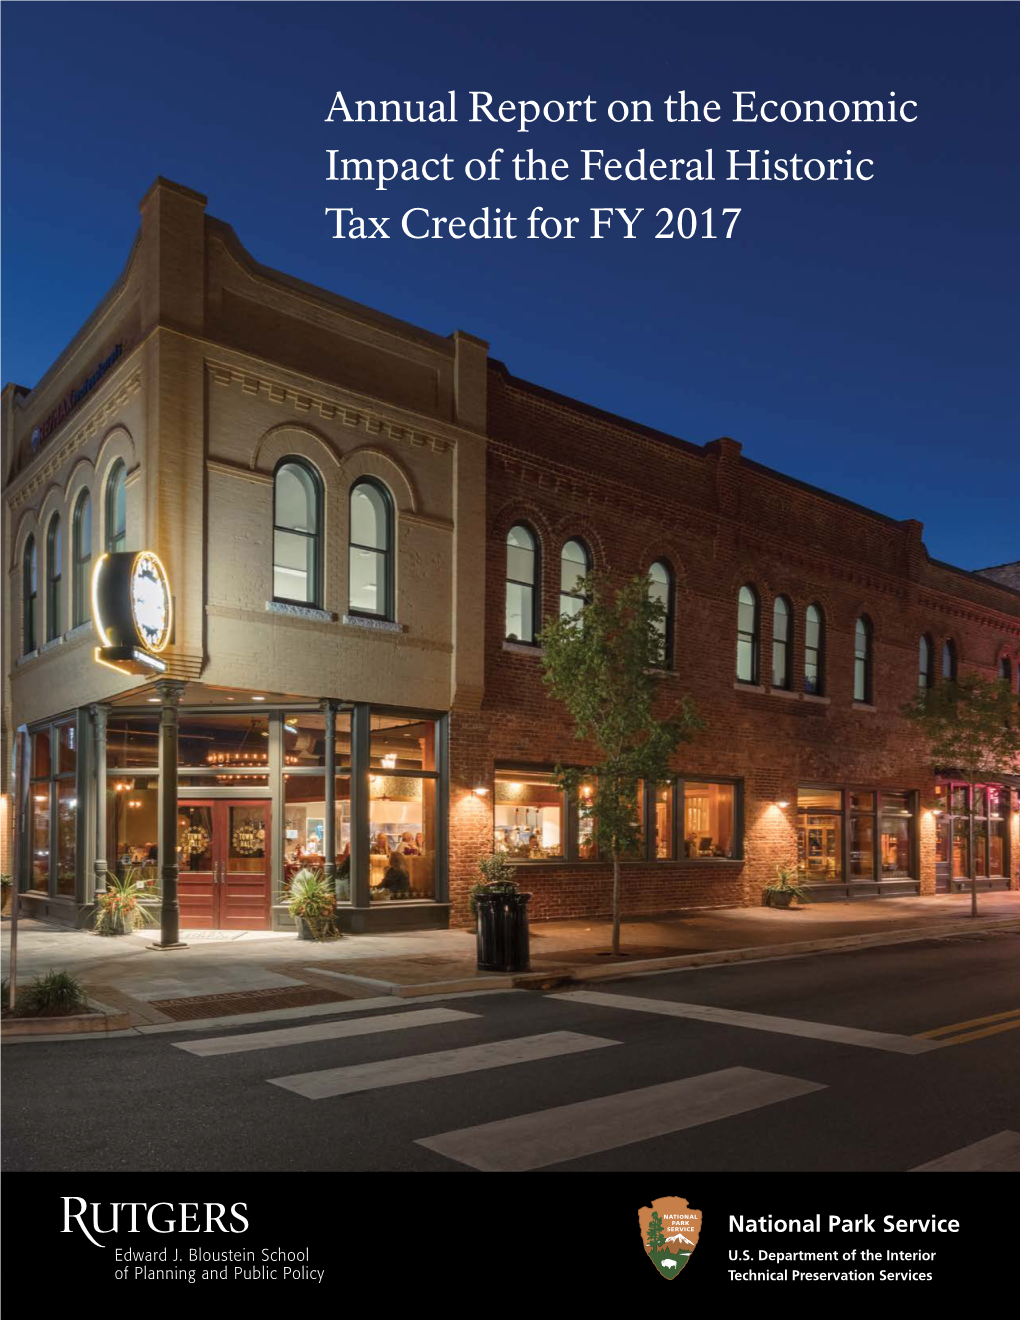 Annual Report on the Economic Impact of the Federal Historic Tax Credit for FY 2017